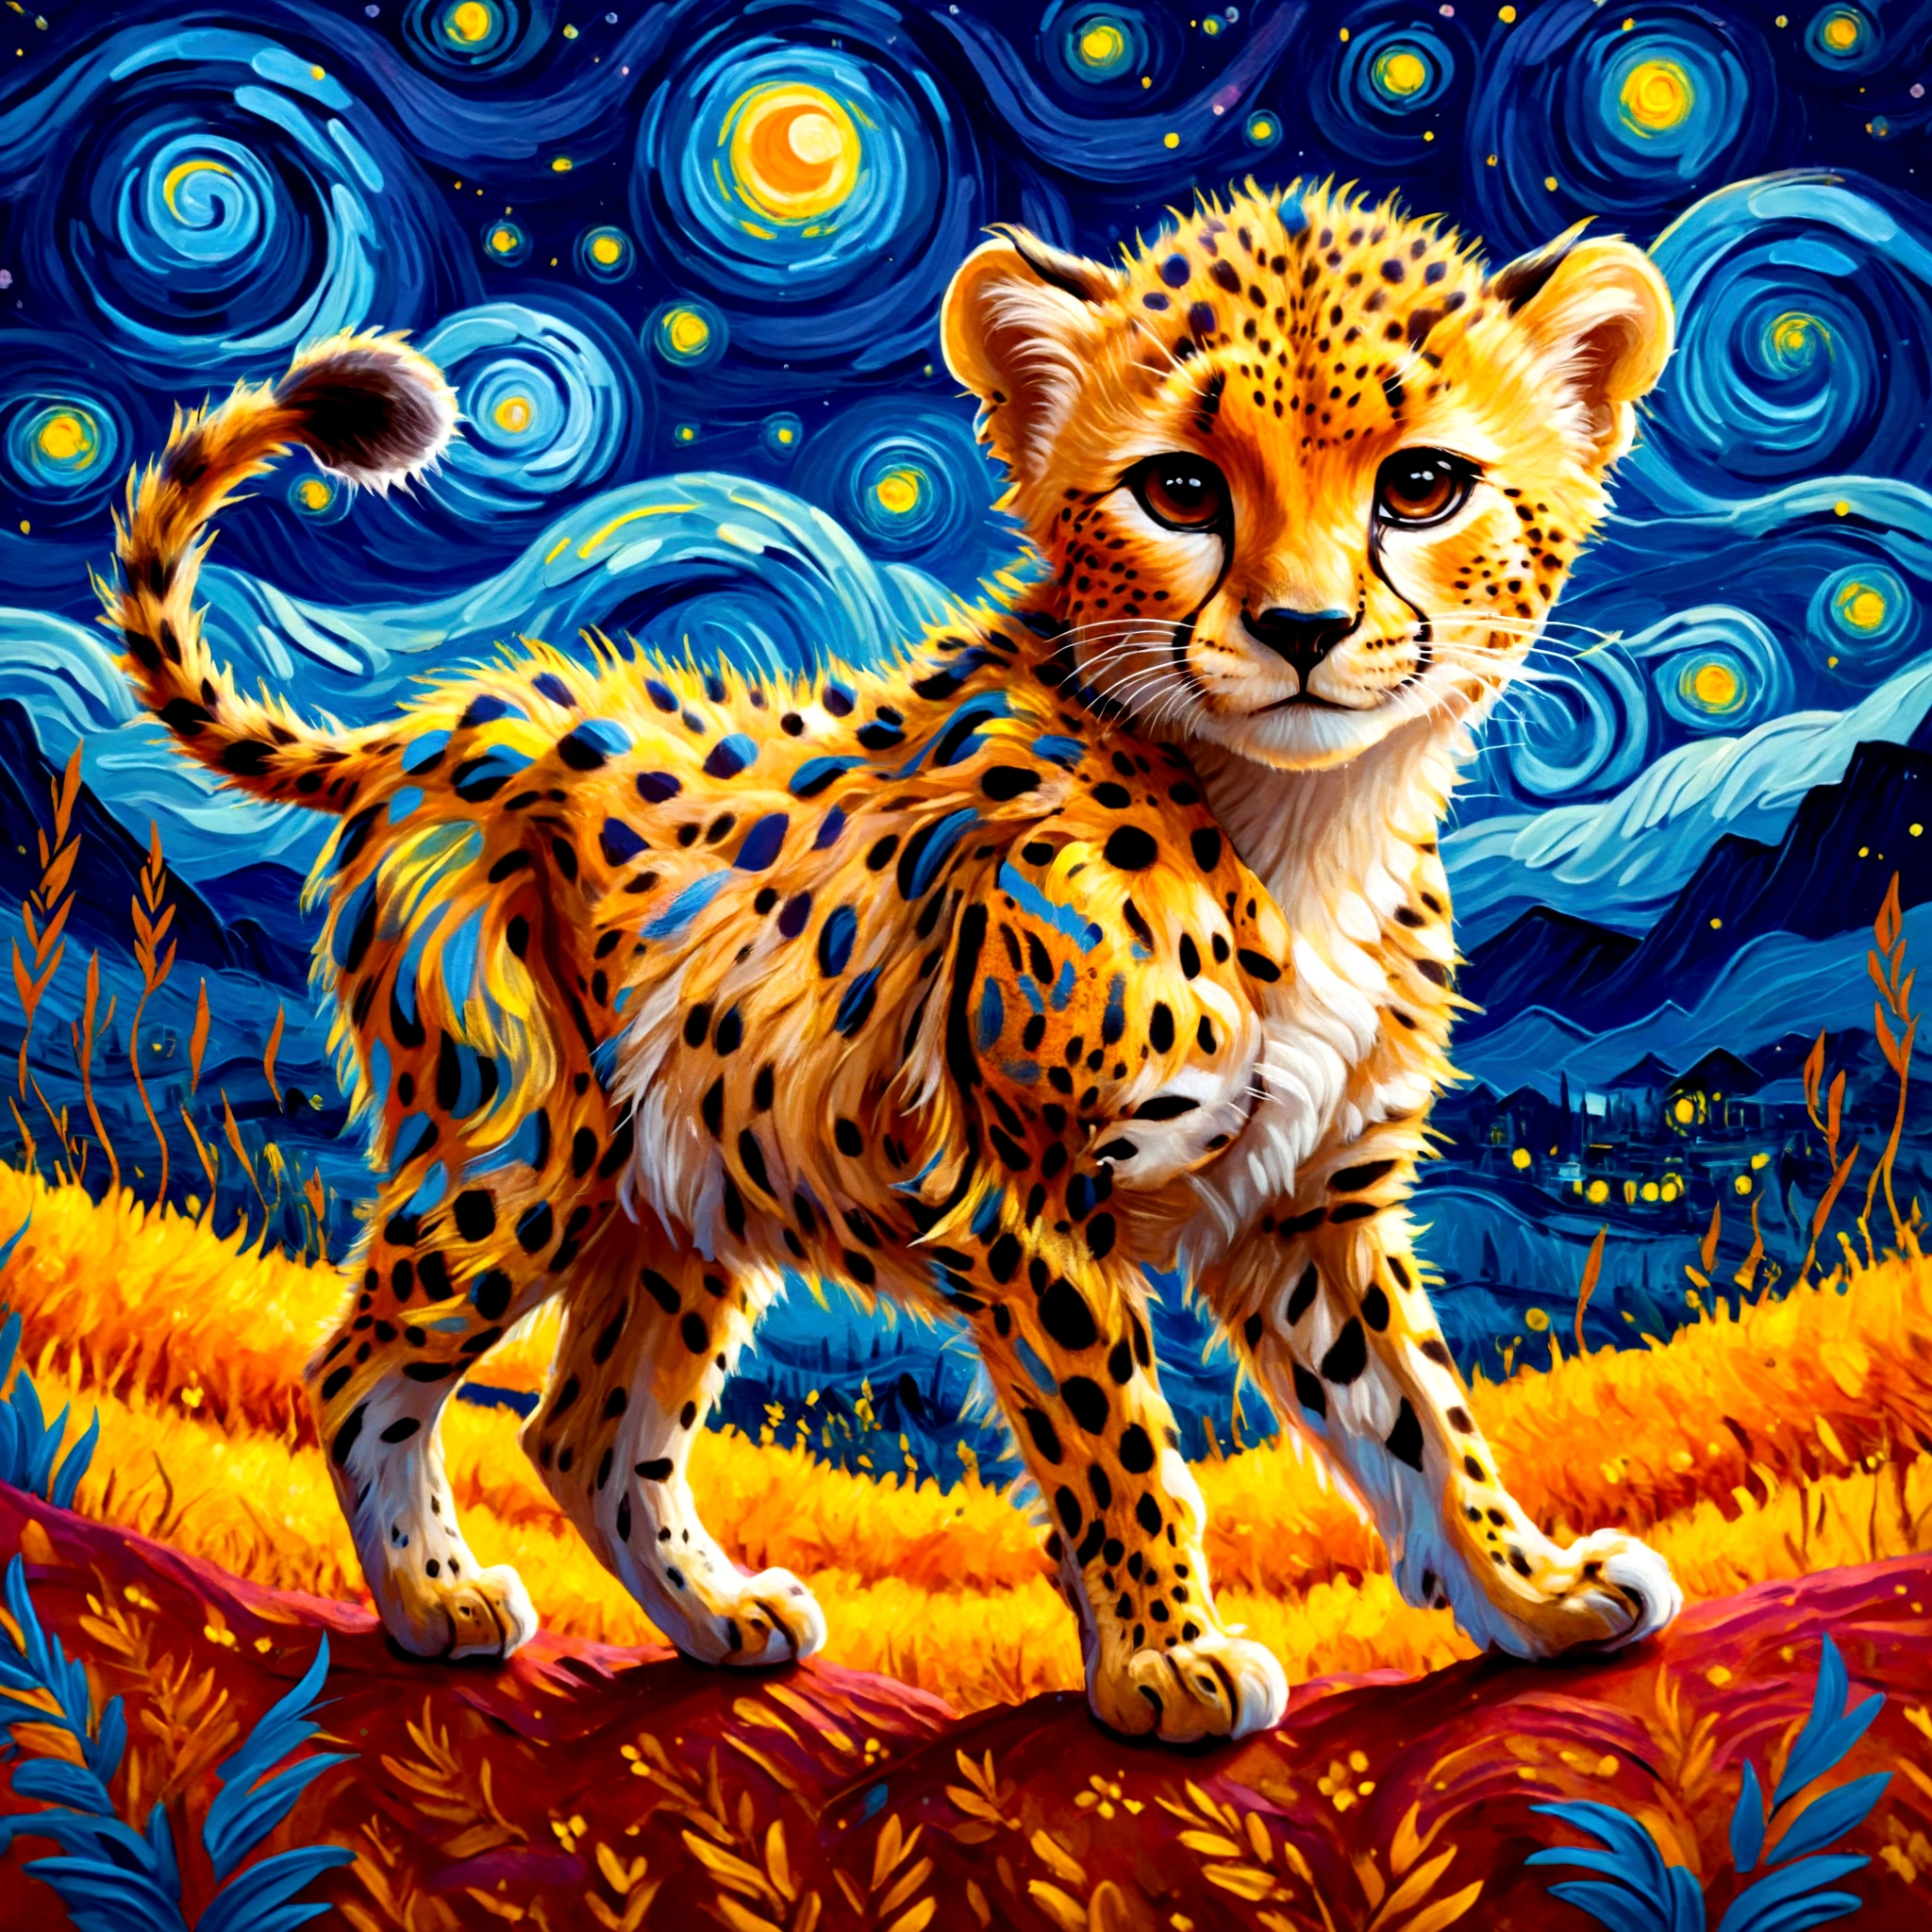 A stylized illustration of a cheetah cub in the style of Van Gogh, with swirling brushstrokes and vibrant colors, 
Vivid contrast, gentle touch rendering, accurate detail, high detail, shining contours, precision, high-quality, stunningly beautiful touch rendering, fantasy,